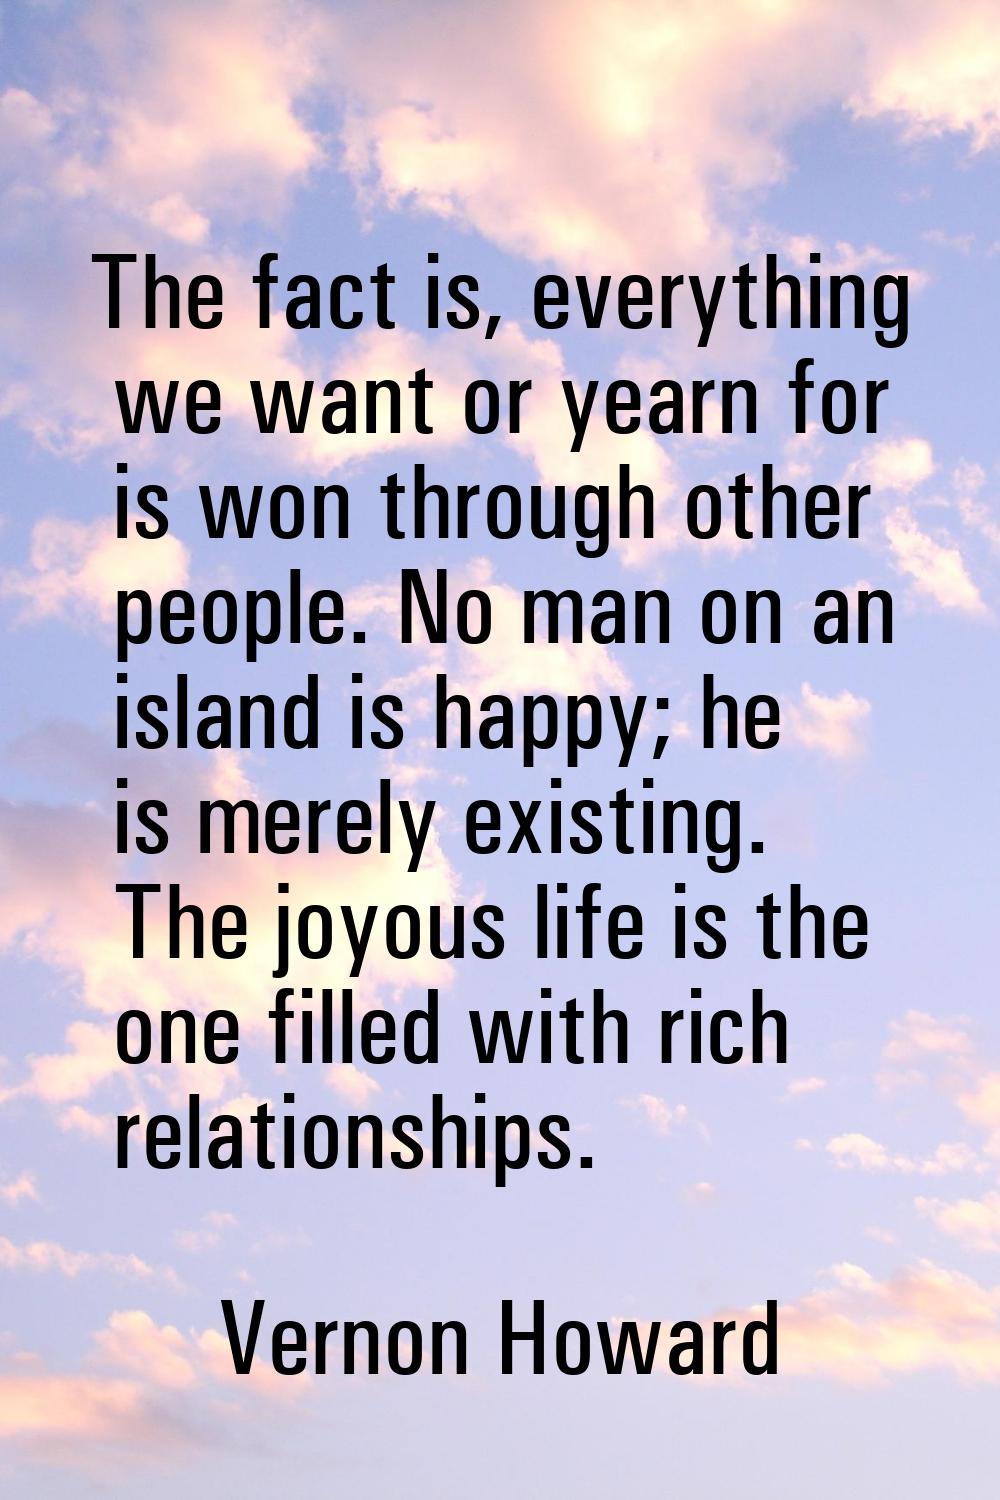 The fact is, everything we want or yearn for is won through other people. No man on an island is ha